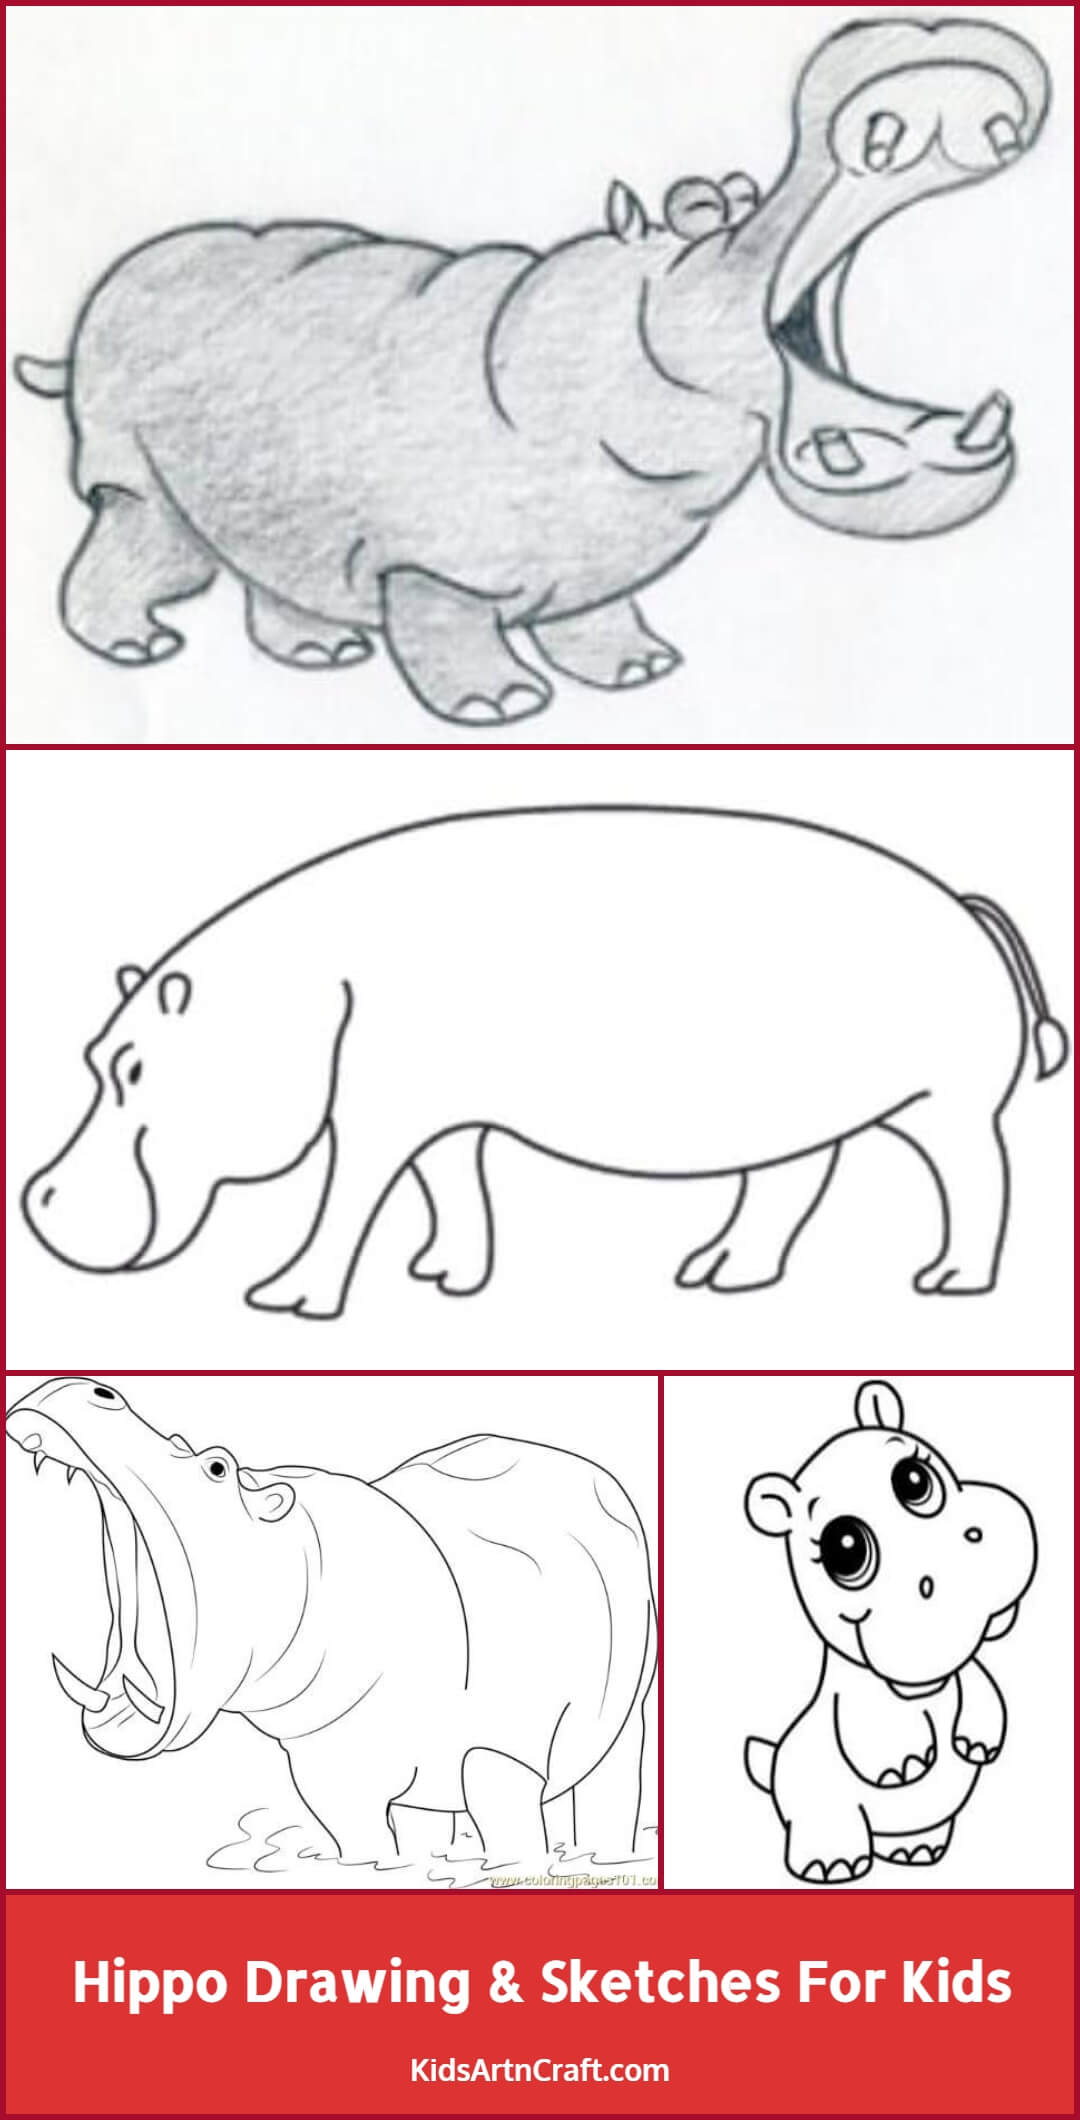 Hippo Drawing & Sketches For Kids